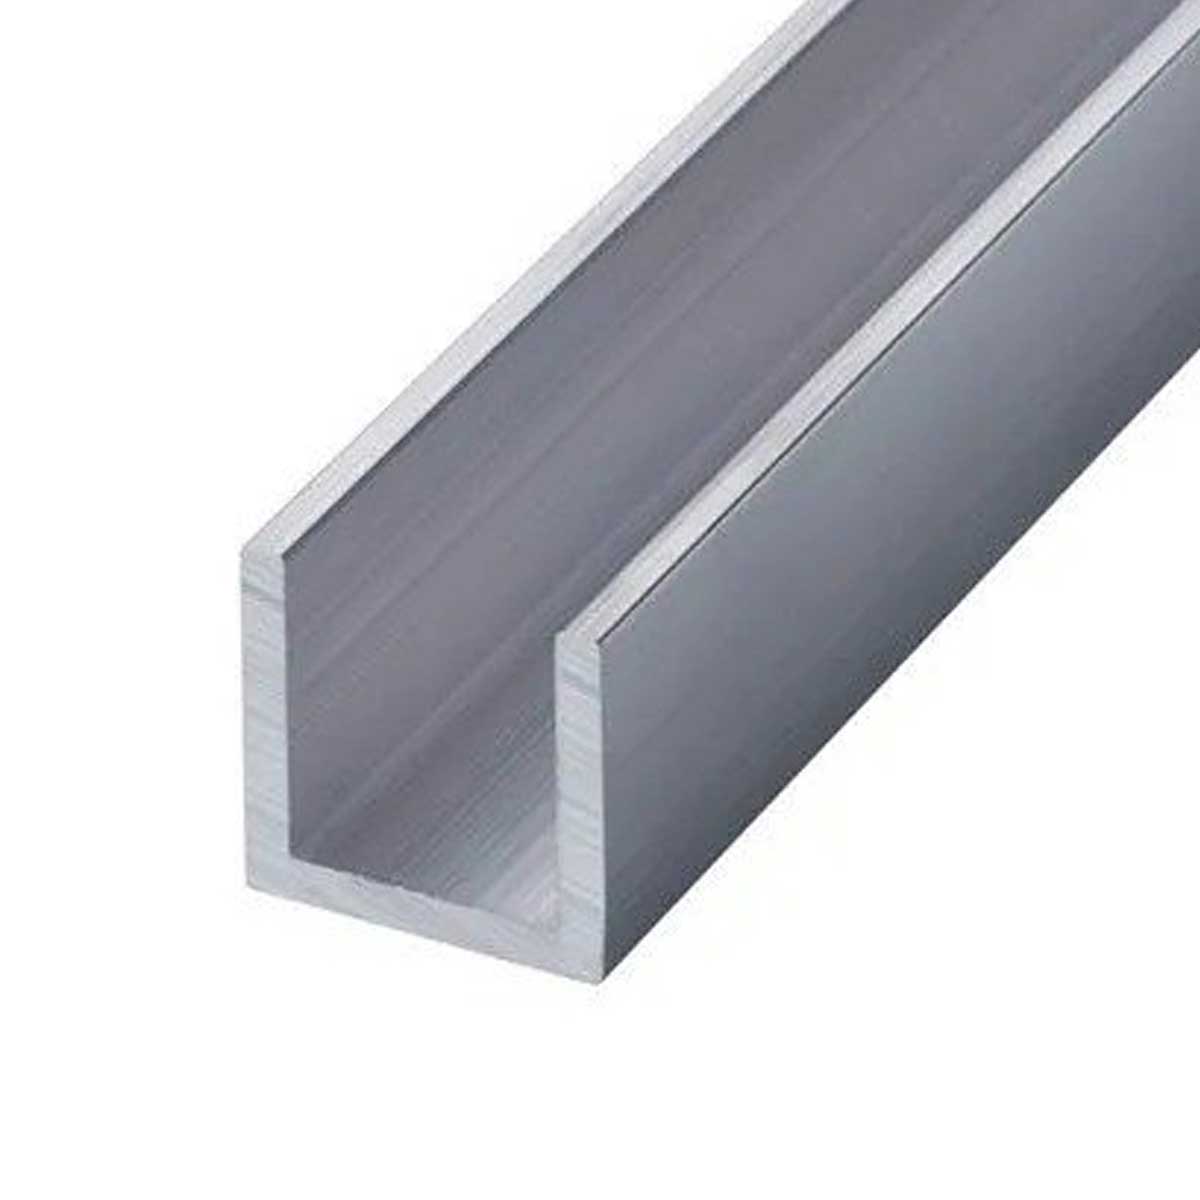 Aluminium C Channel For Construction Manufacturers, Suppliers in Pauri Garhwal